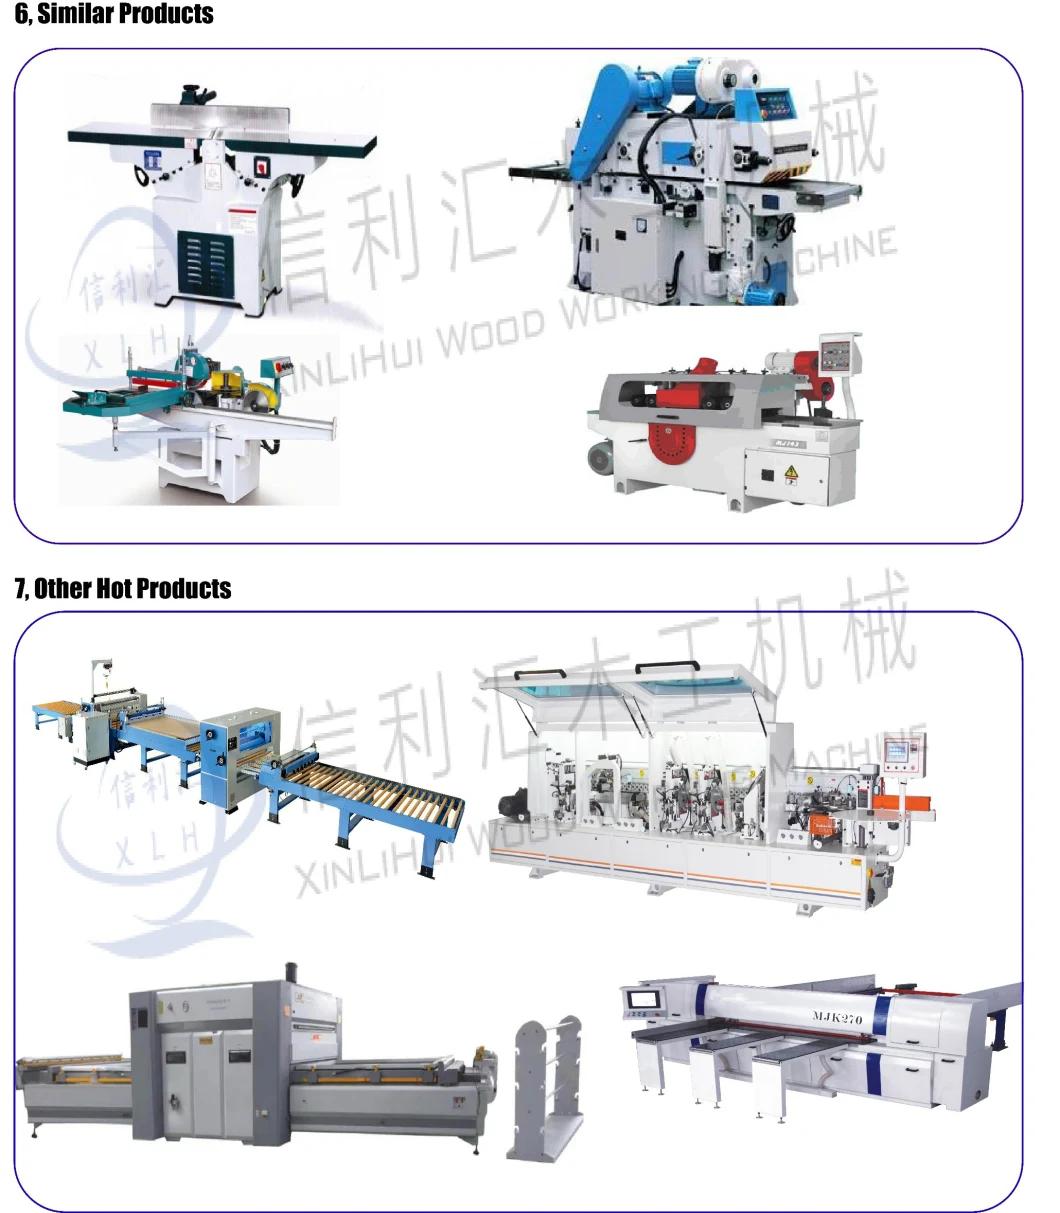 Upright Pin Router, Floor Model Upright Router, CNC Router Upright, Over Arm Router, Over Arm Pin Router Machine Made in China, Good Price